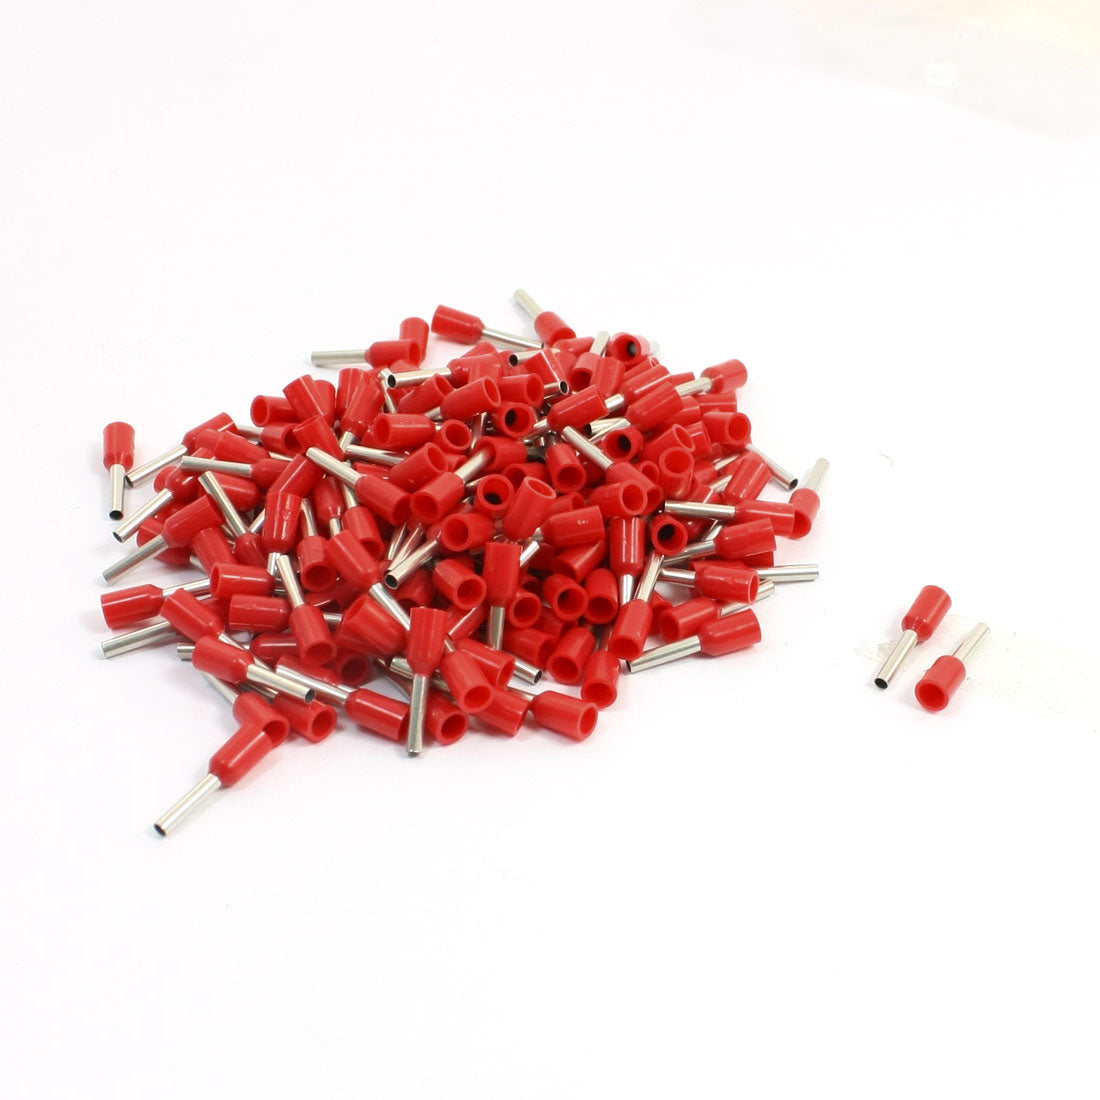 uxcell Uxcell 190Pcs E1008 Red Pre Insulate Ferrule Wire Connector Terminals for 18AWG Cable